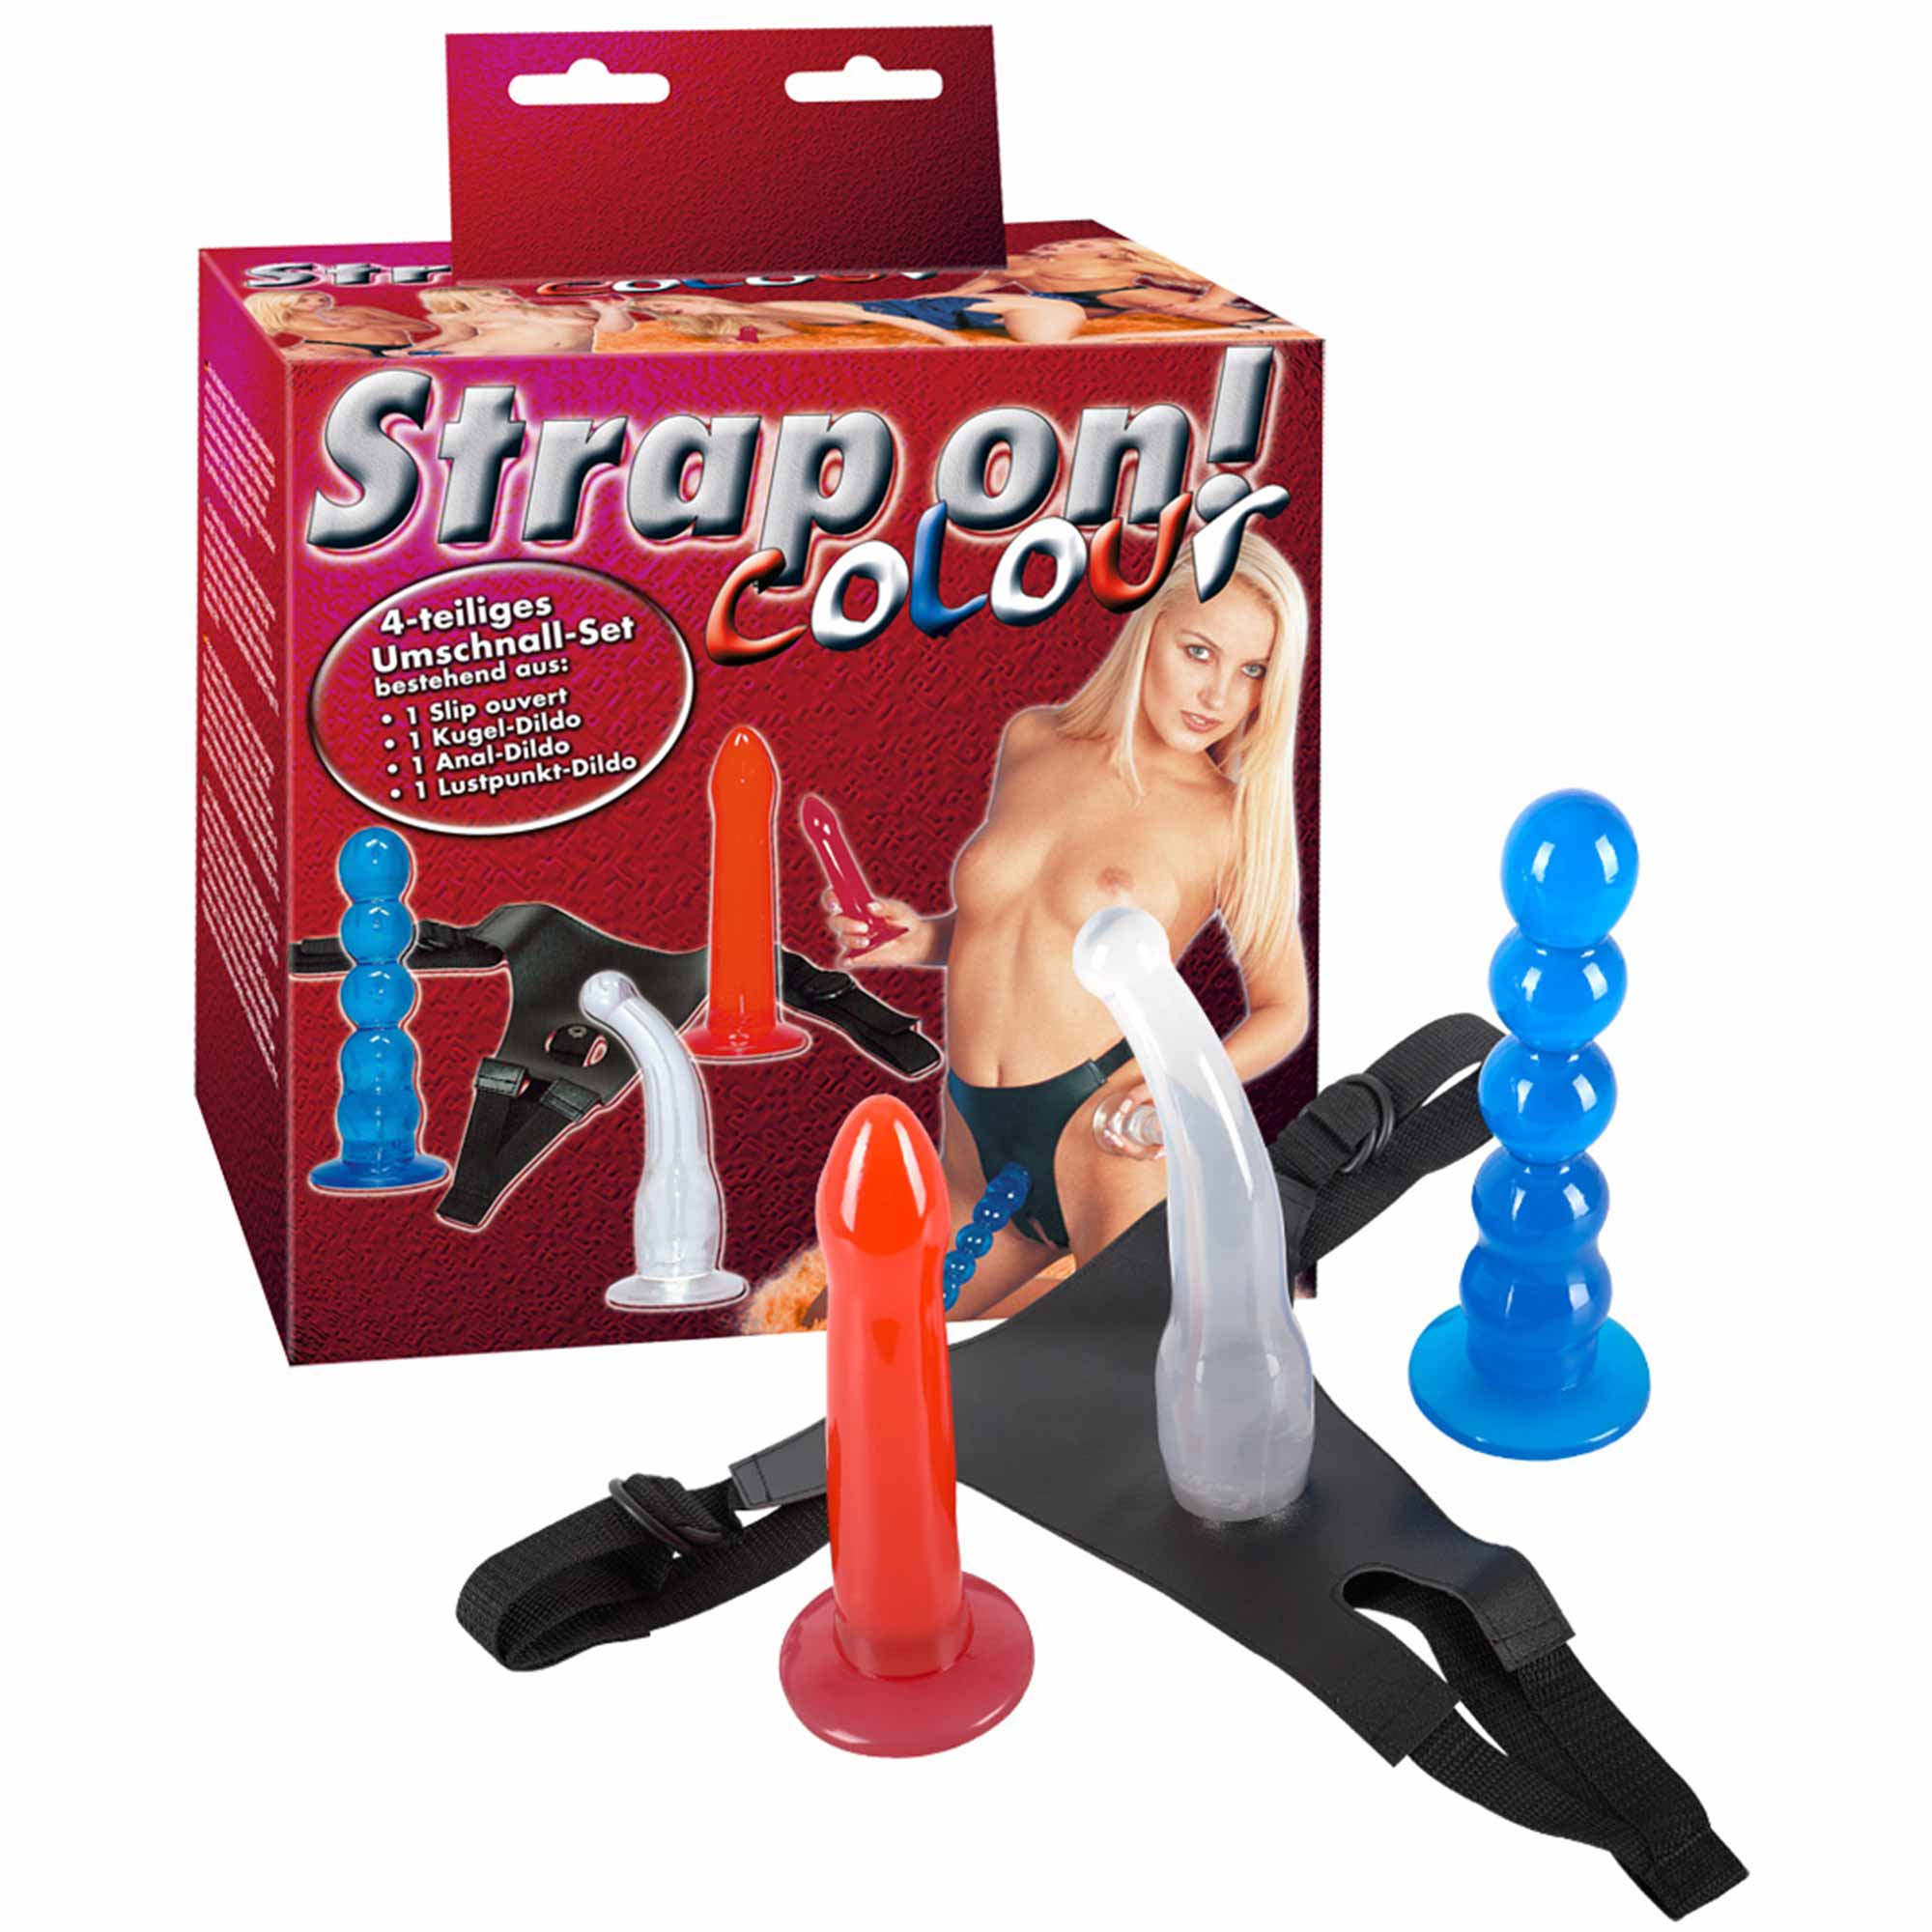 Strap-On Color 4-piece strap-on